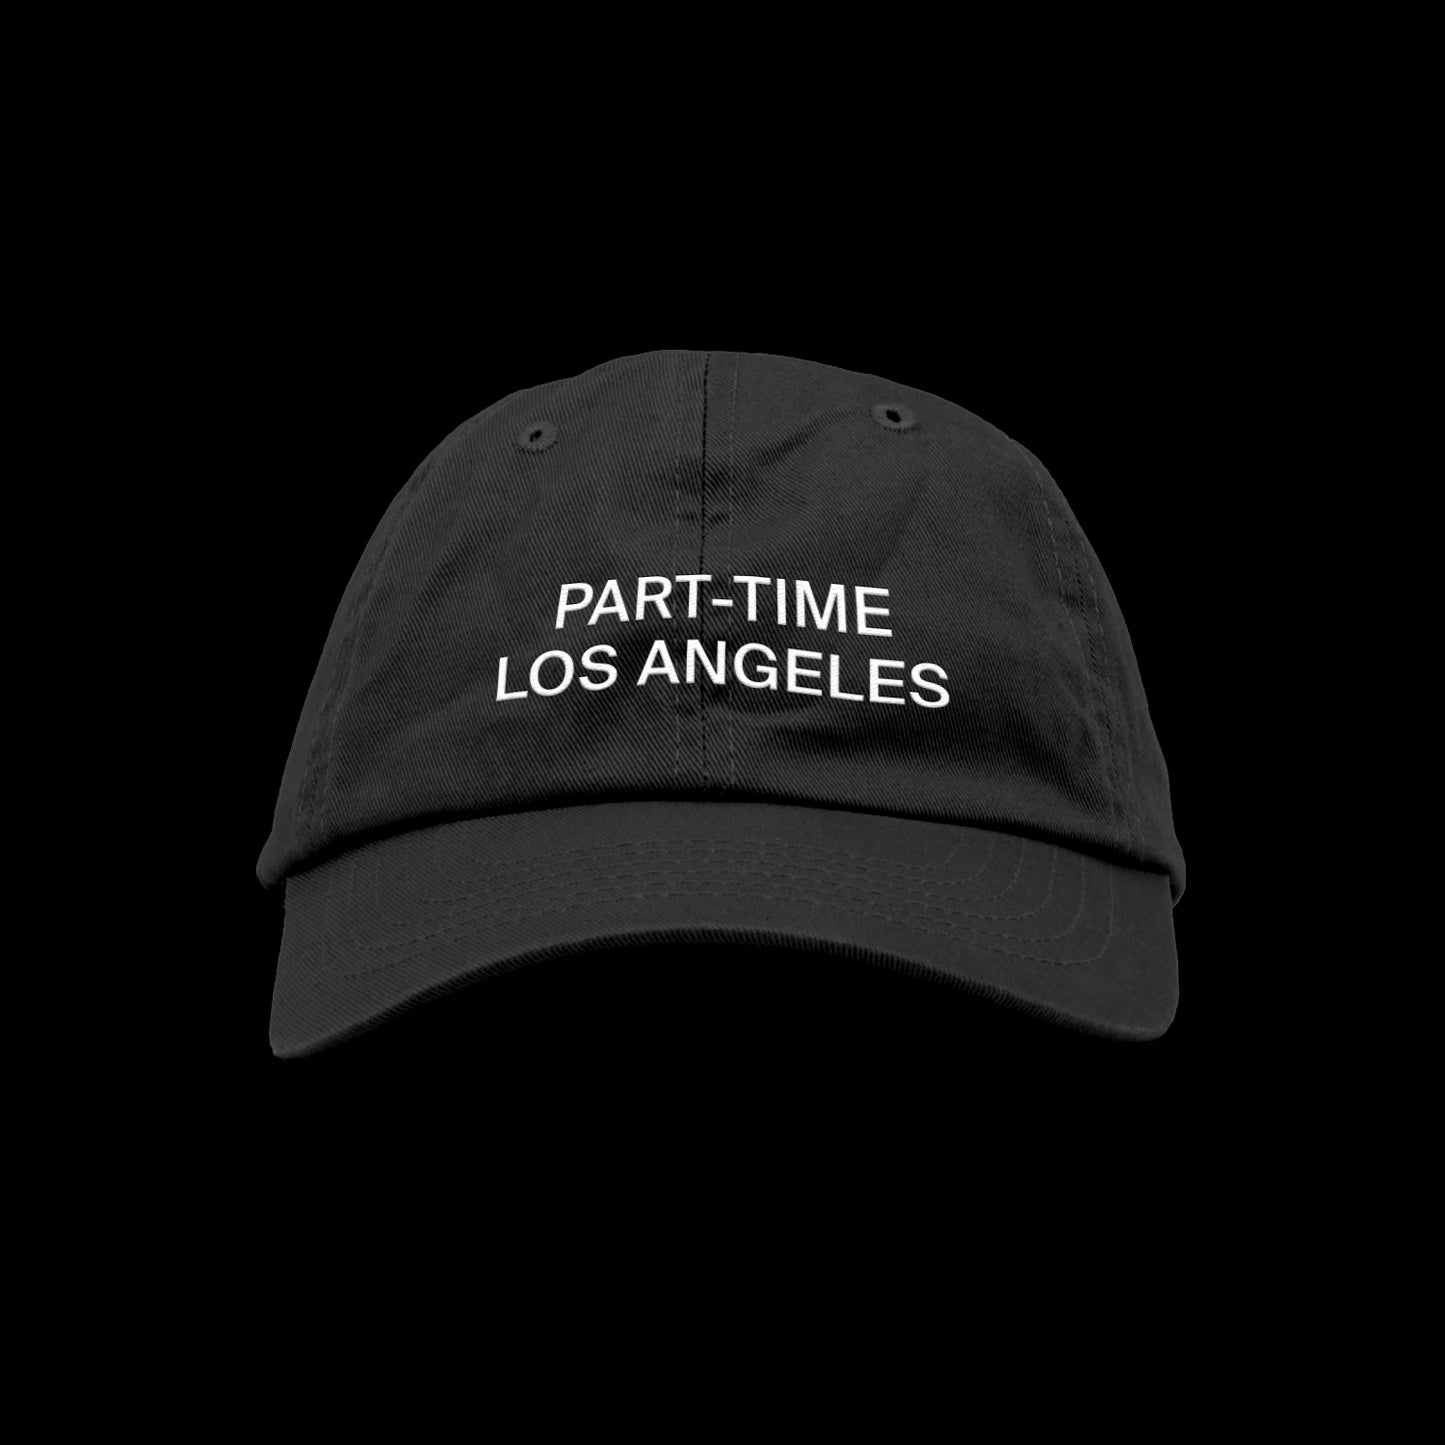 PART-TIME LOS ANGELES